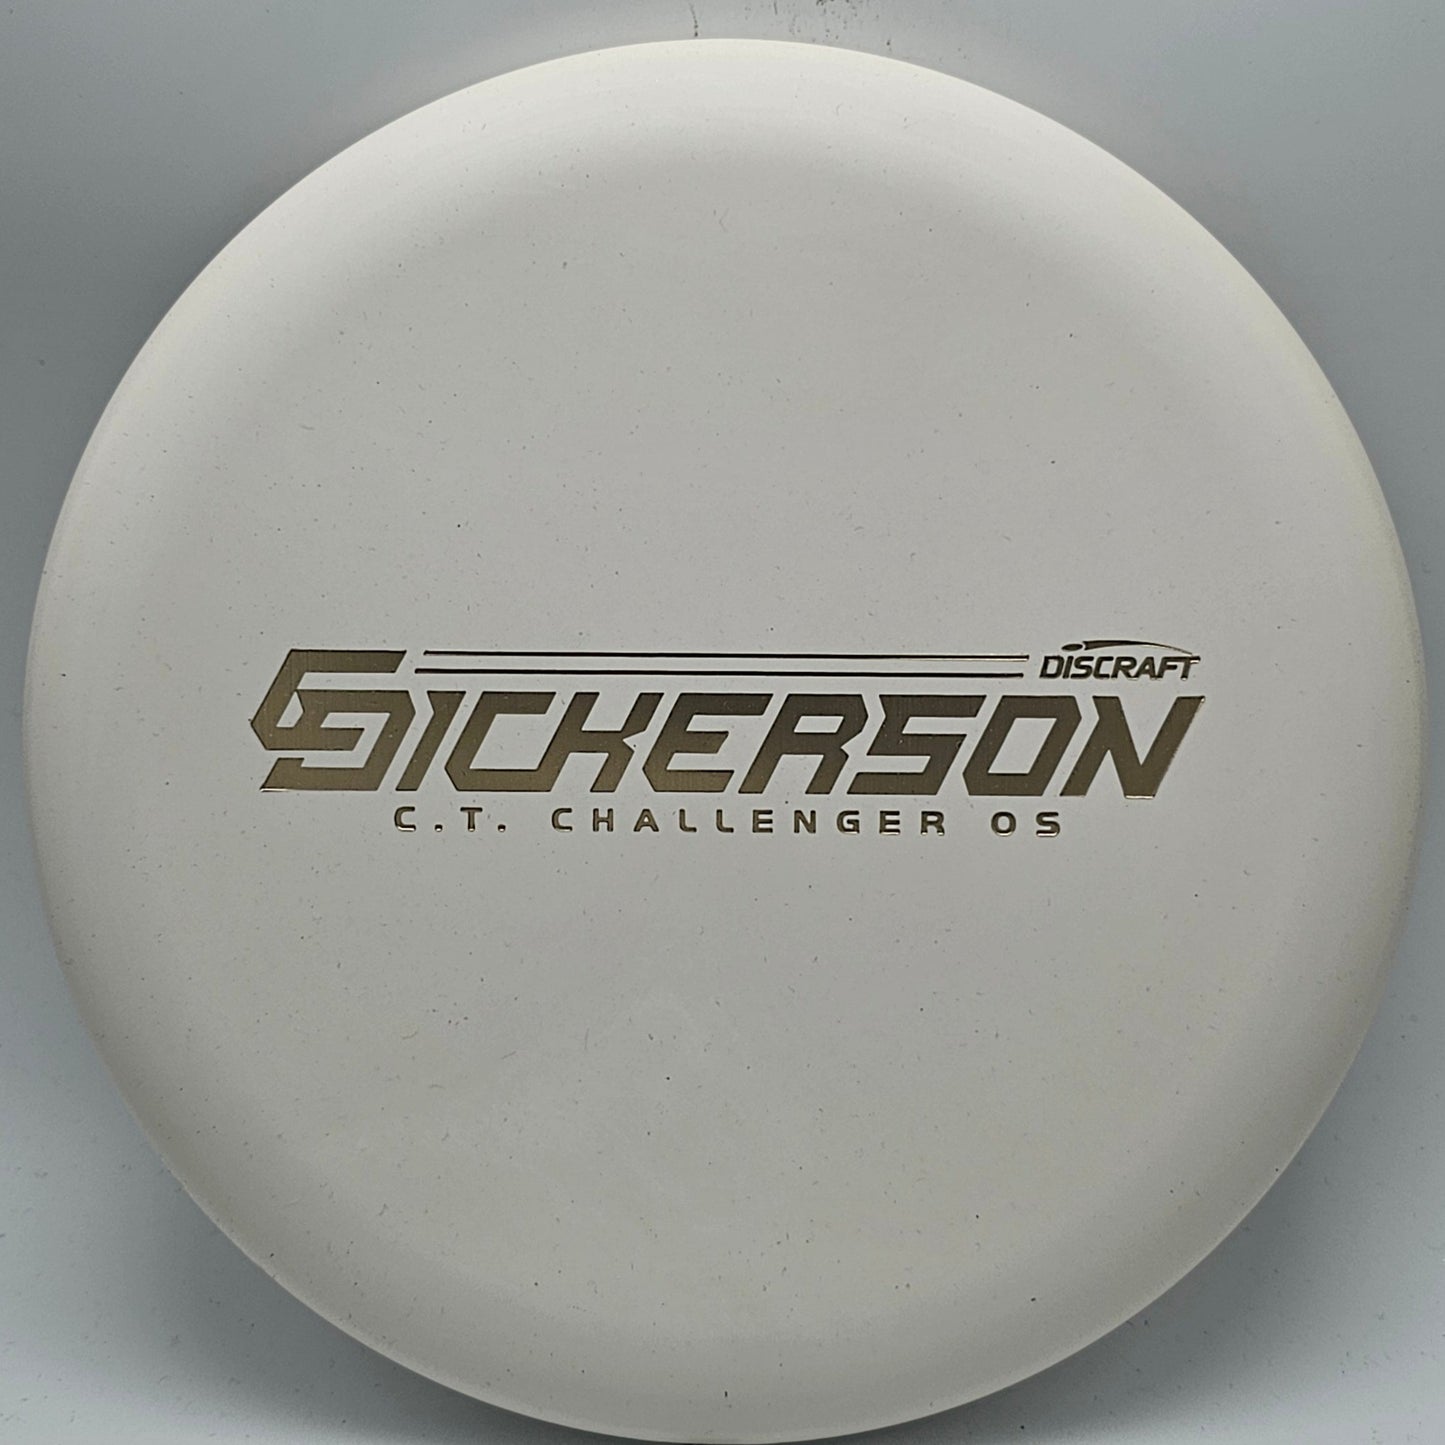 Discraft CT Challenger OS - Chris Dickerson